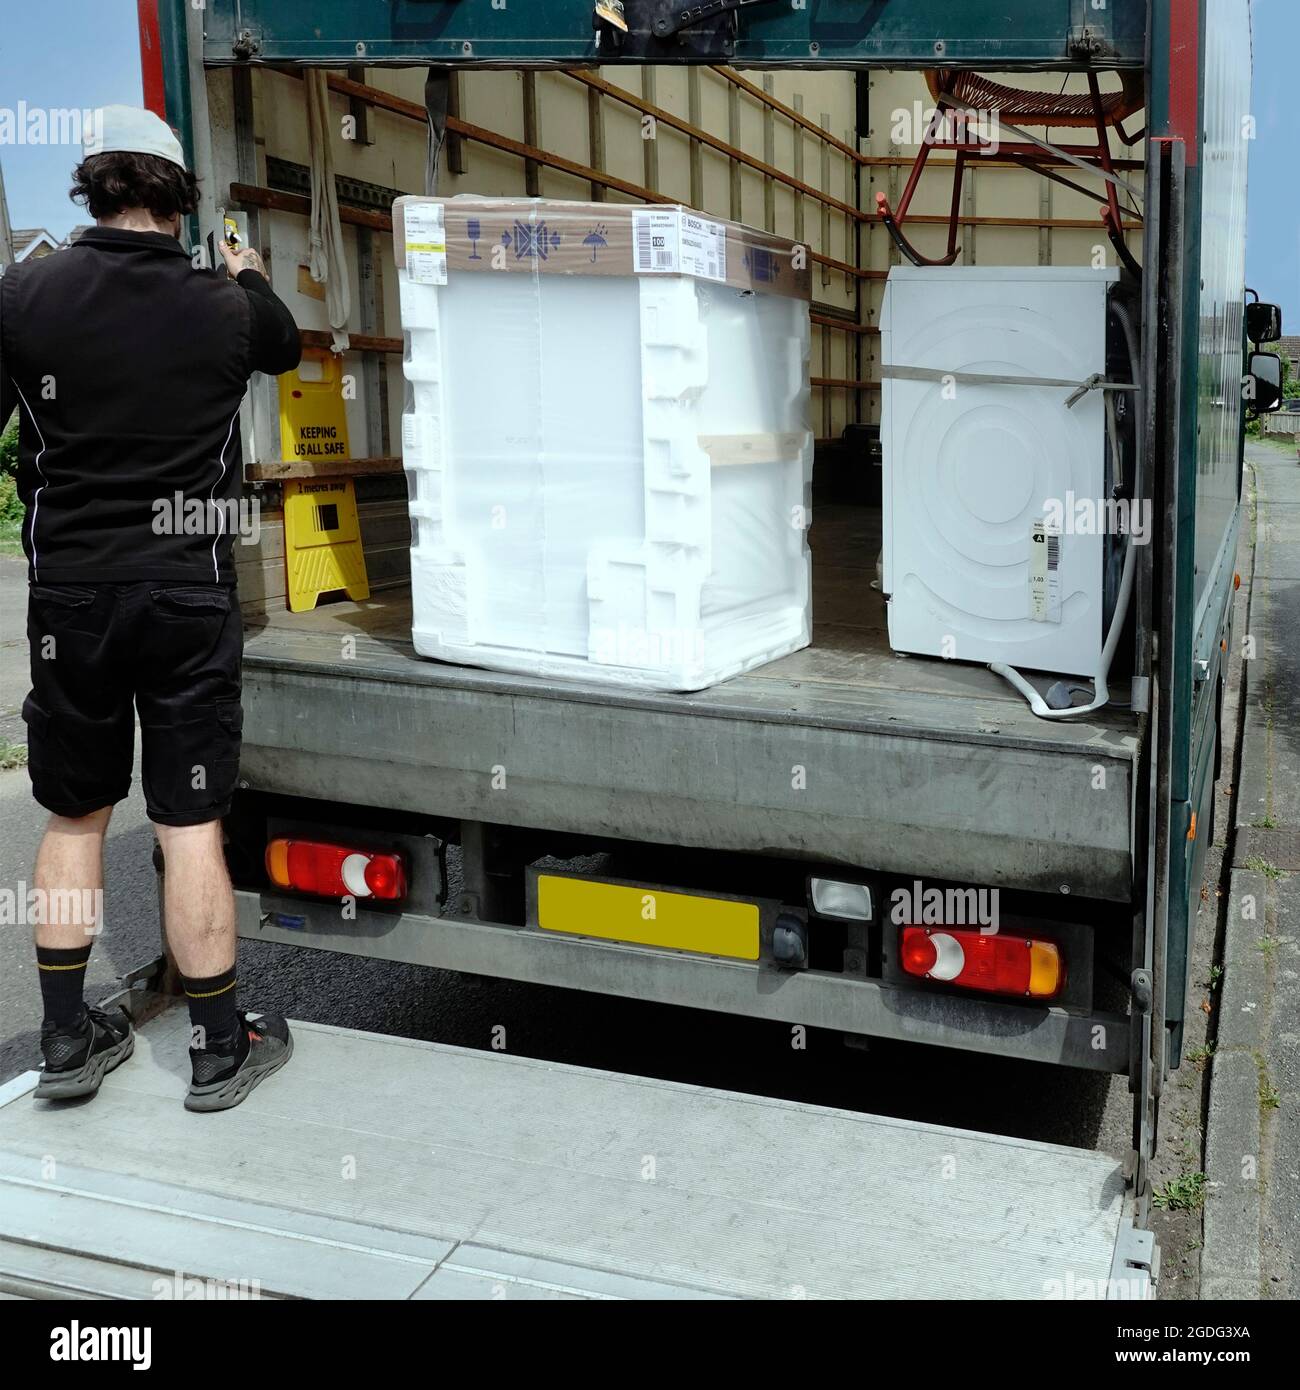 John Lewis department store home delivery driver on lorry tailgate for new Bosch white goods domestic dishwasher appliance in polystyrene packaging UK Stock Photo